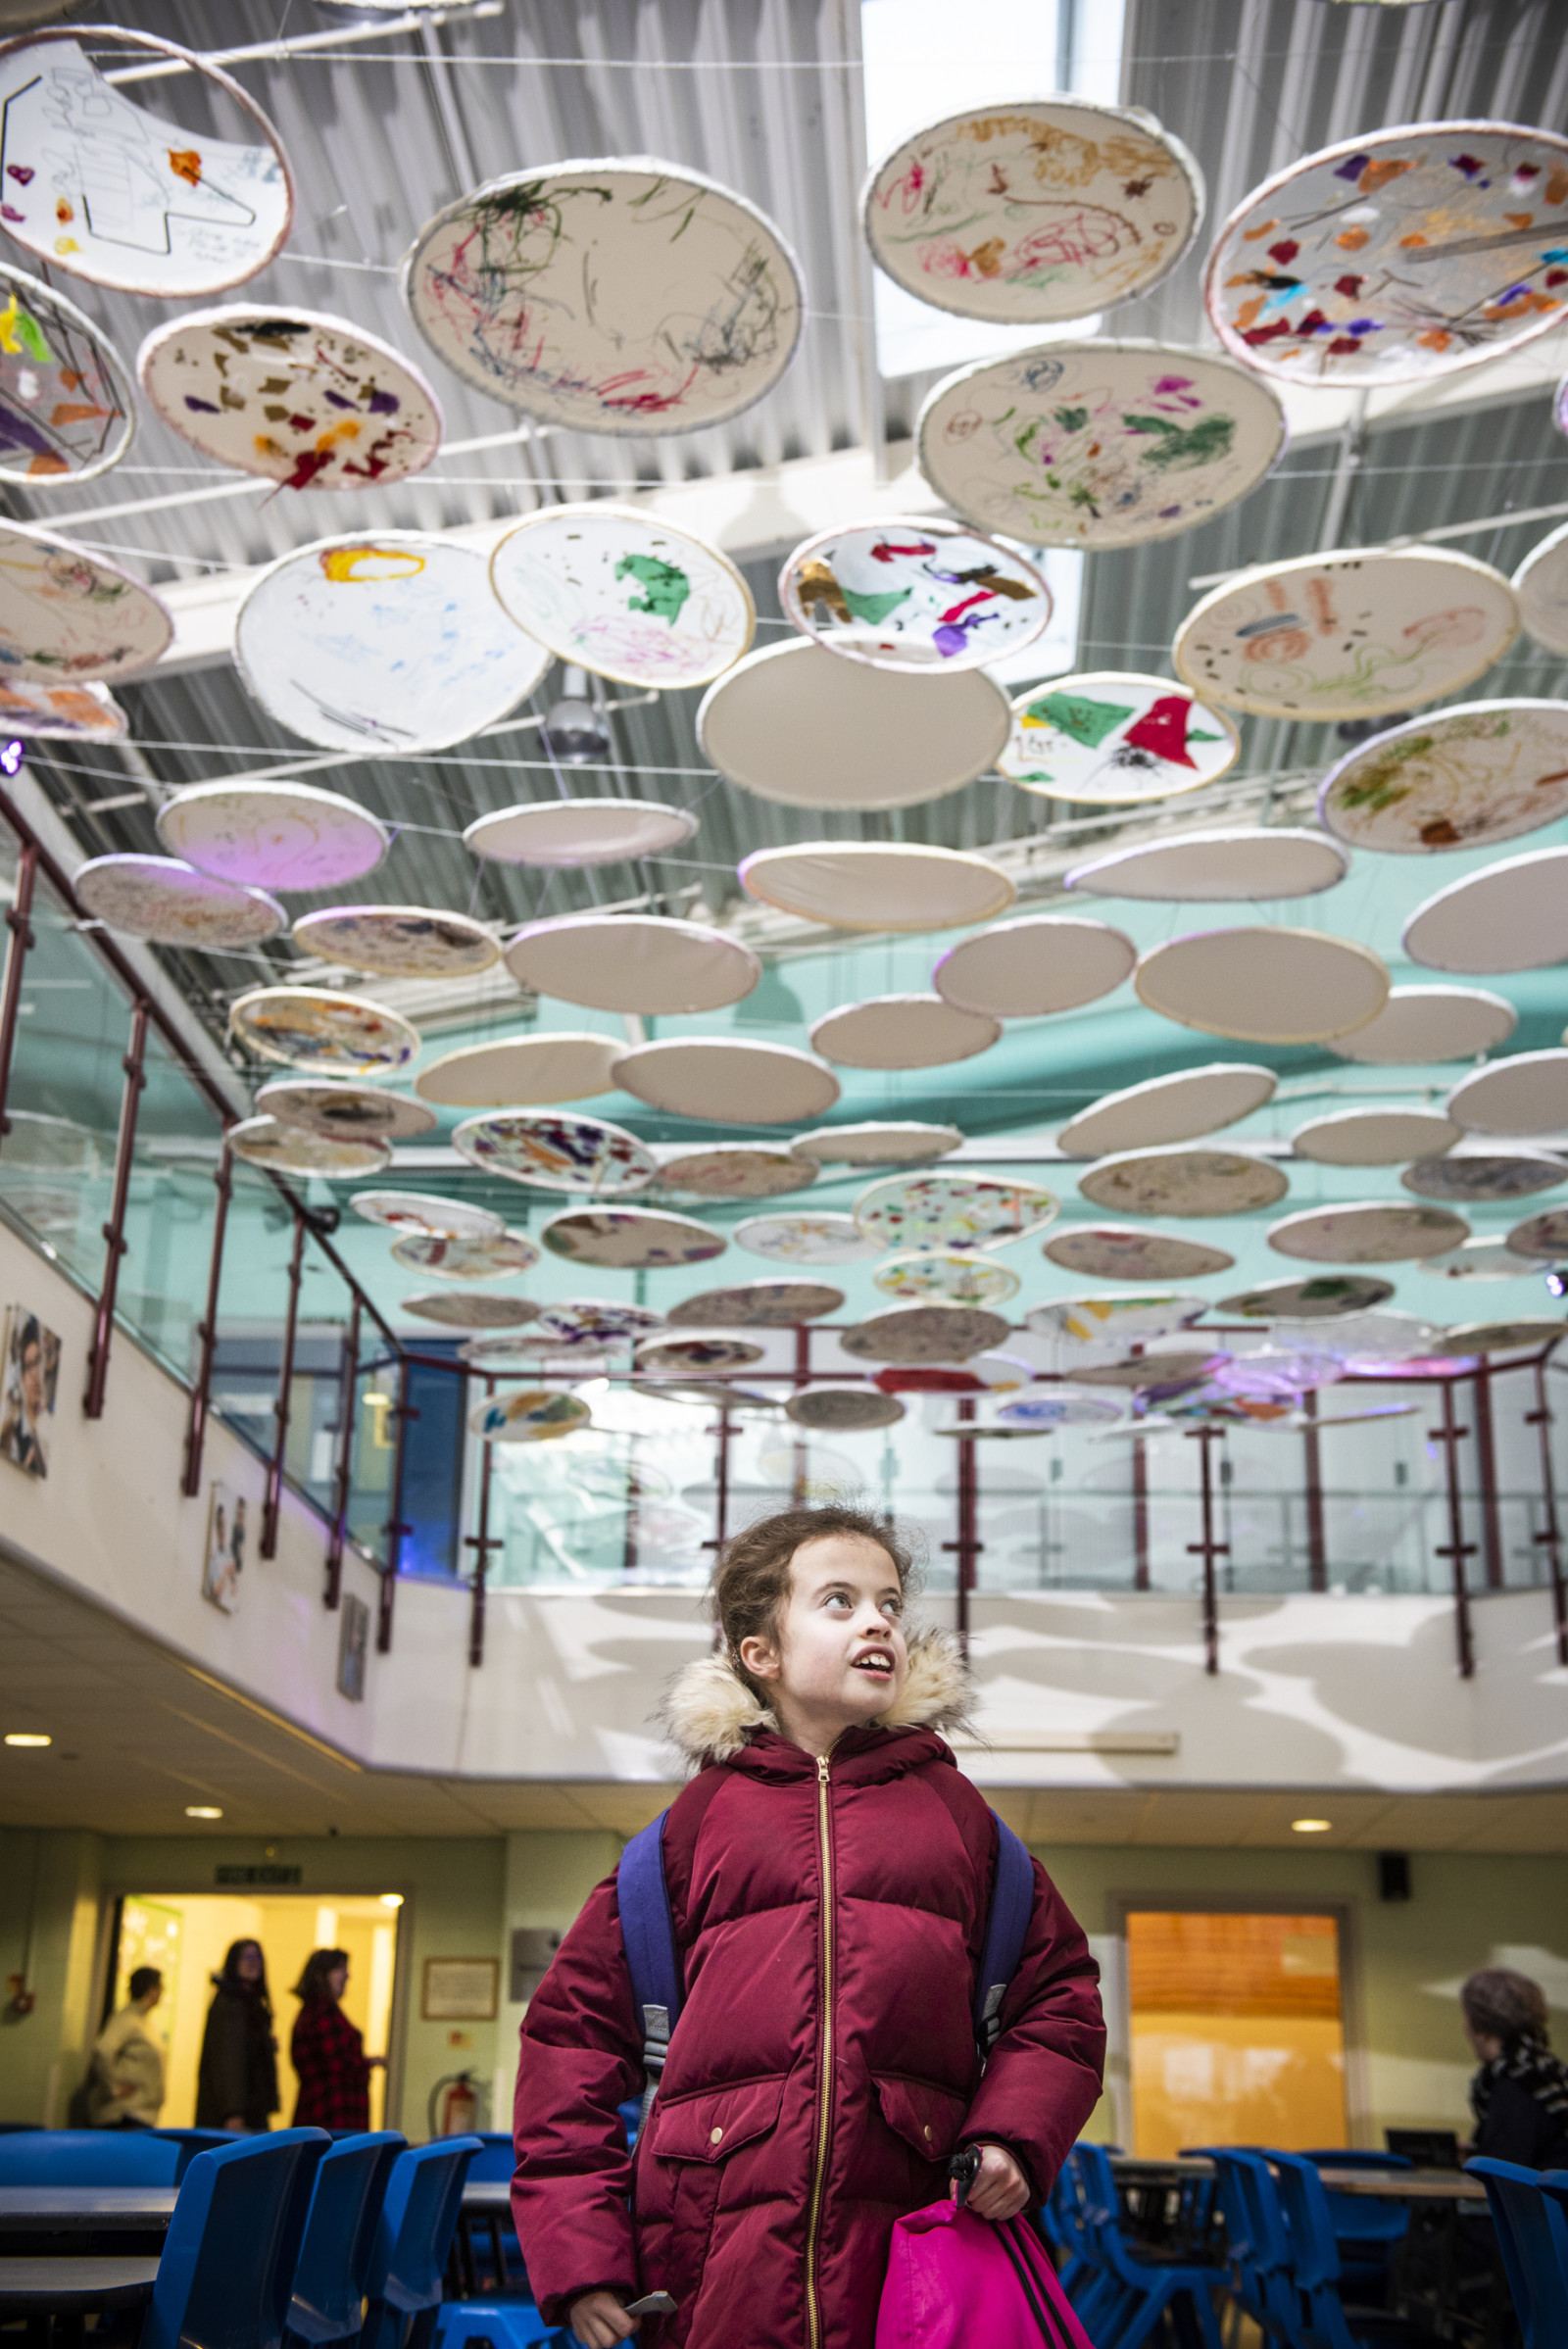 A young girl in a pink coat looks up to an installation hanging over her. The installation consists of many seemingly floating and decorated disks attached together.